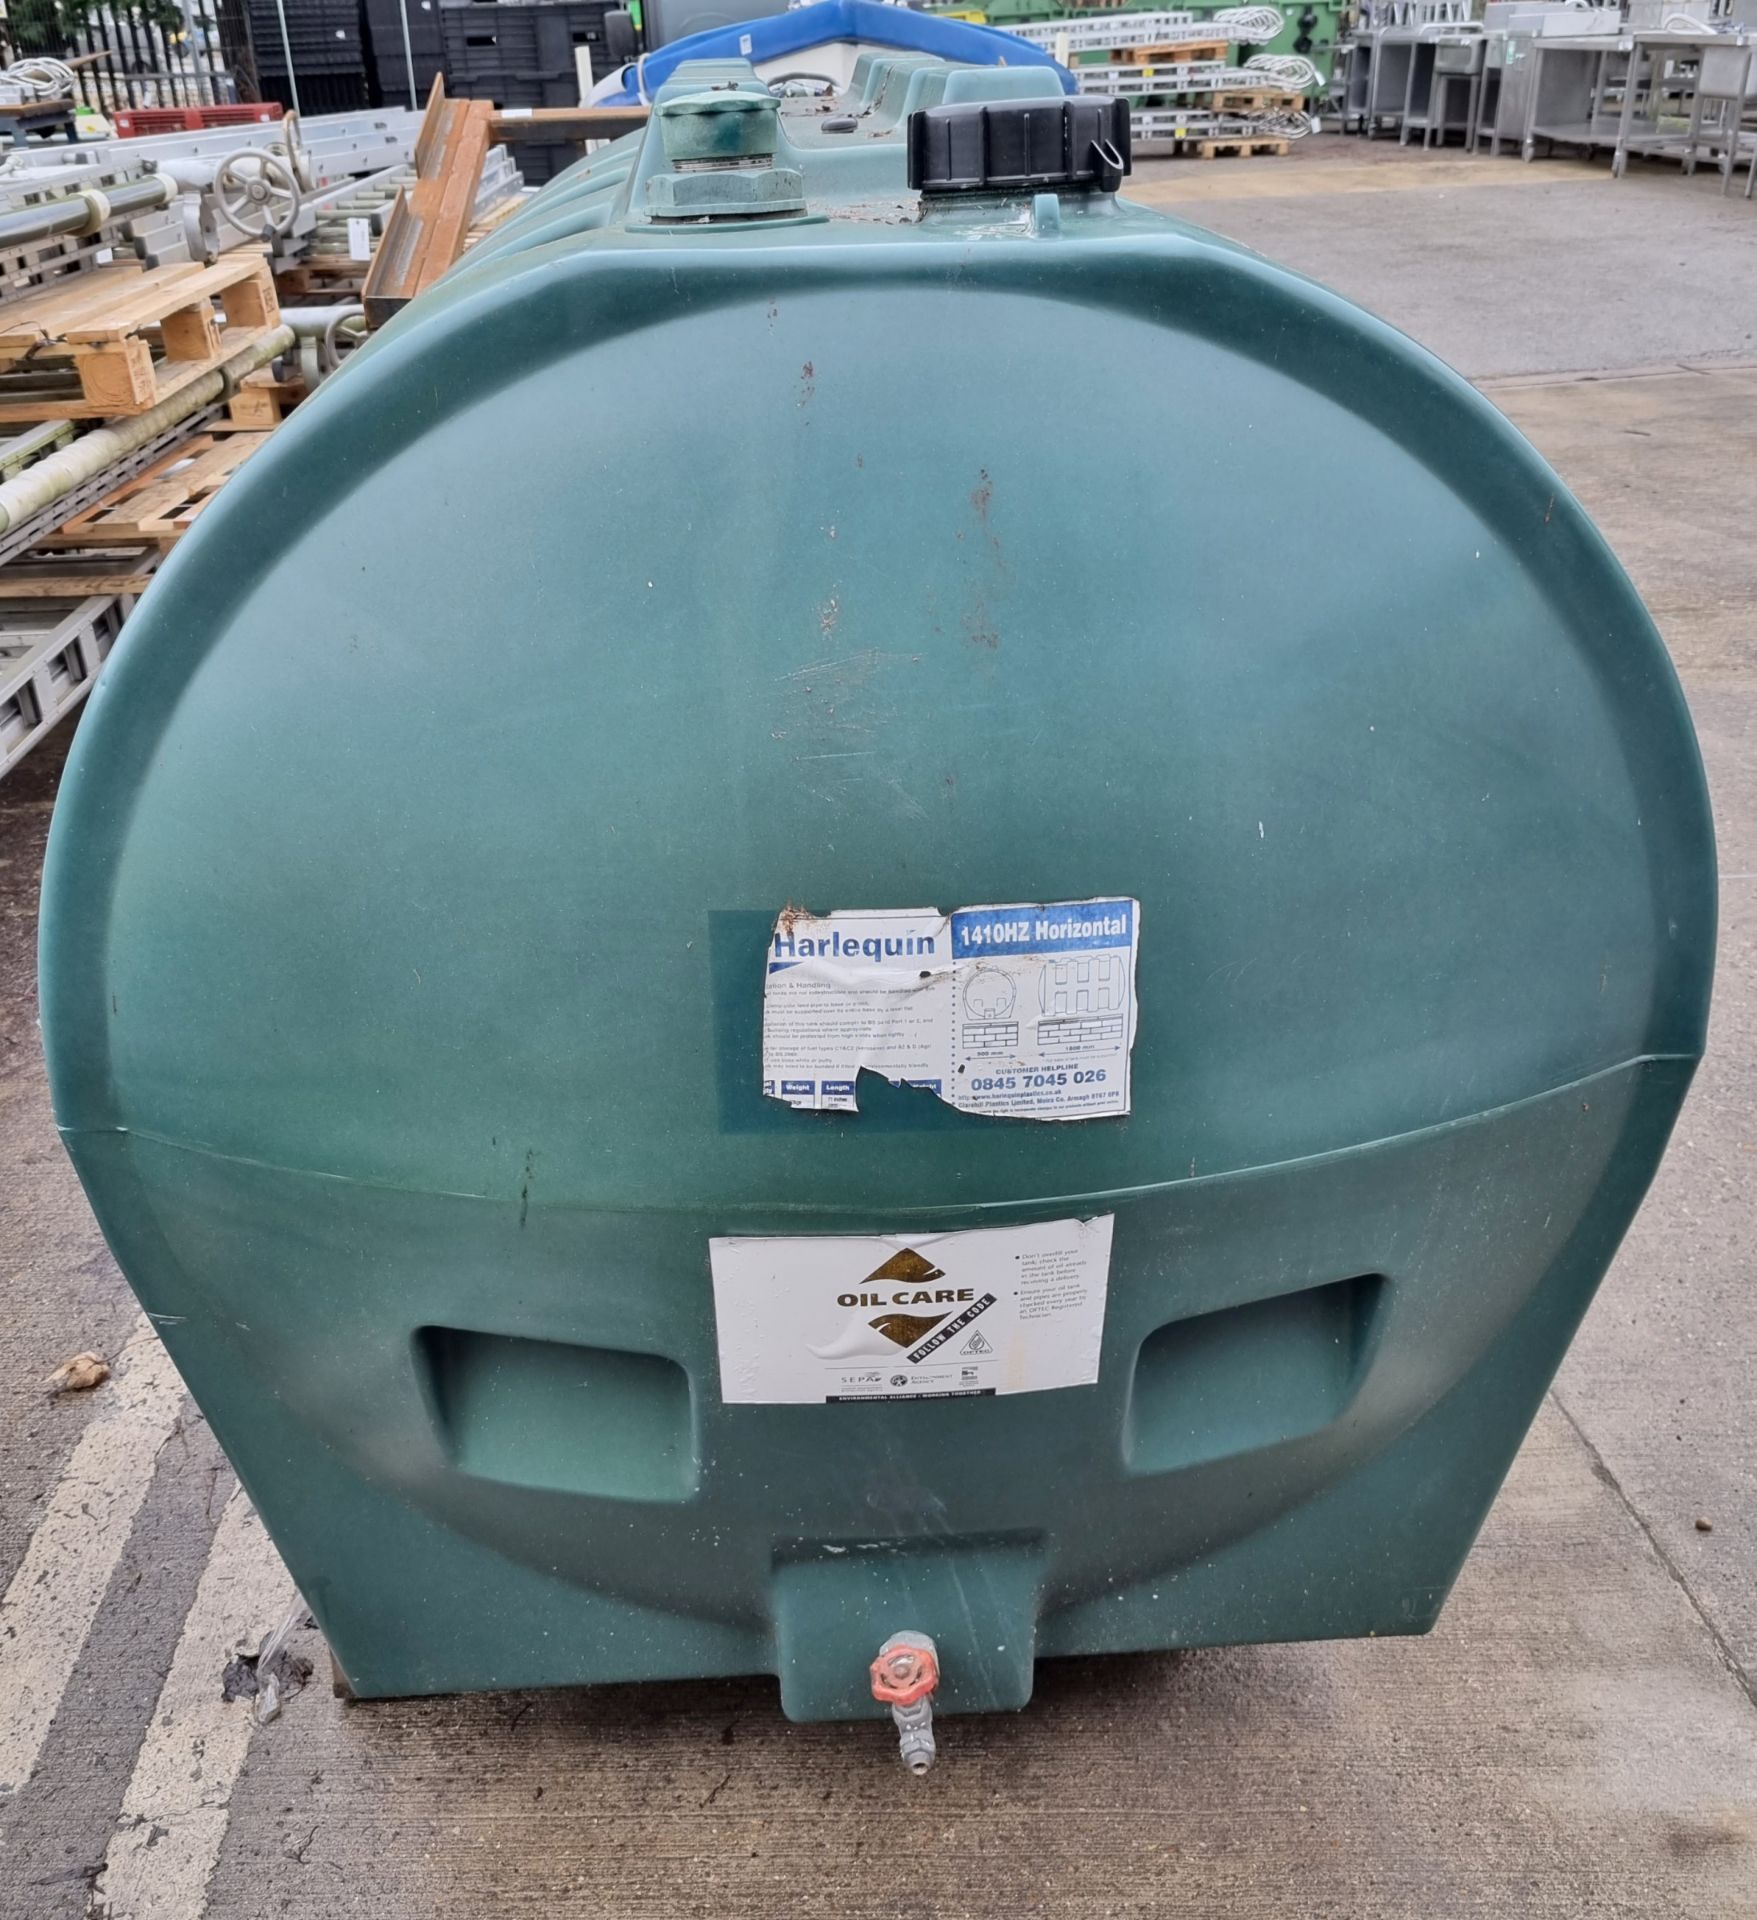 Harlequin 1400 Litre Oil Tank to fit base 1800 x 900mm - Image 3 of 10